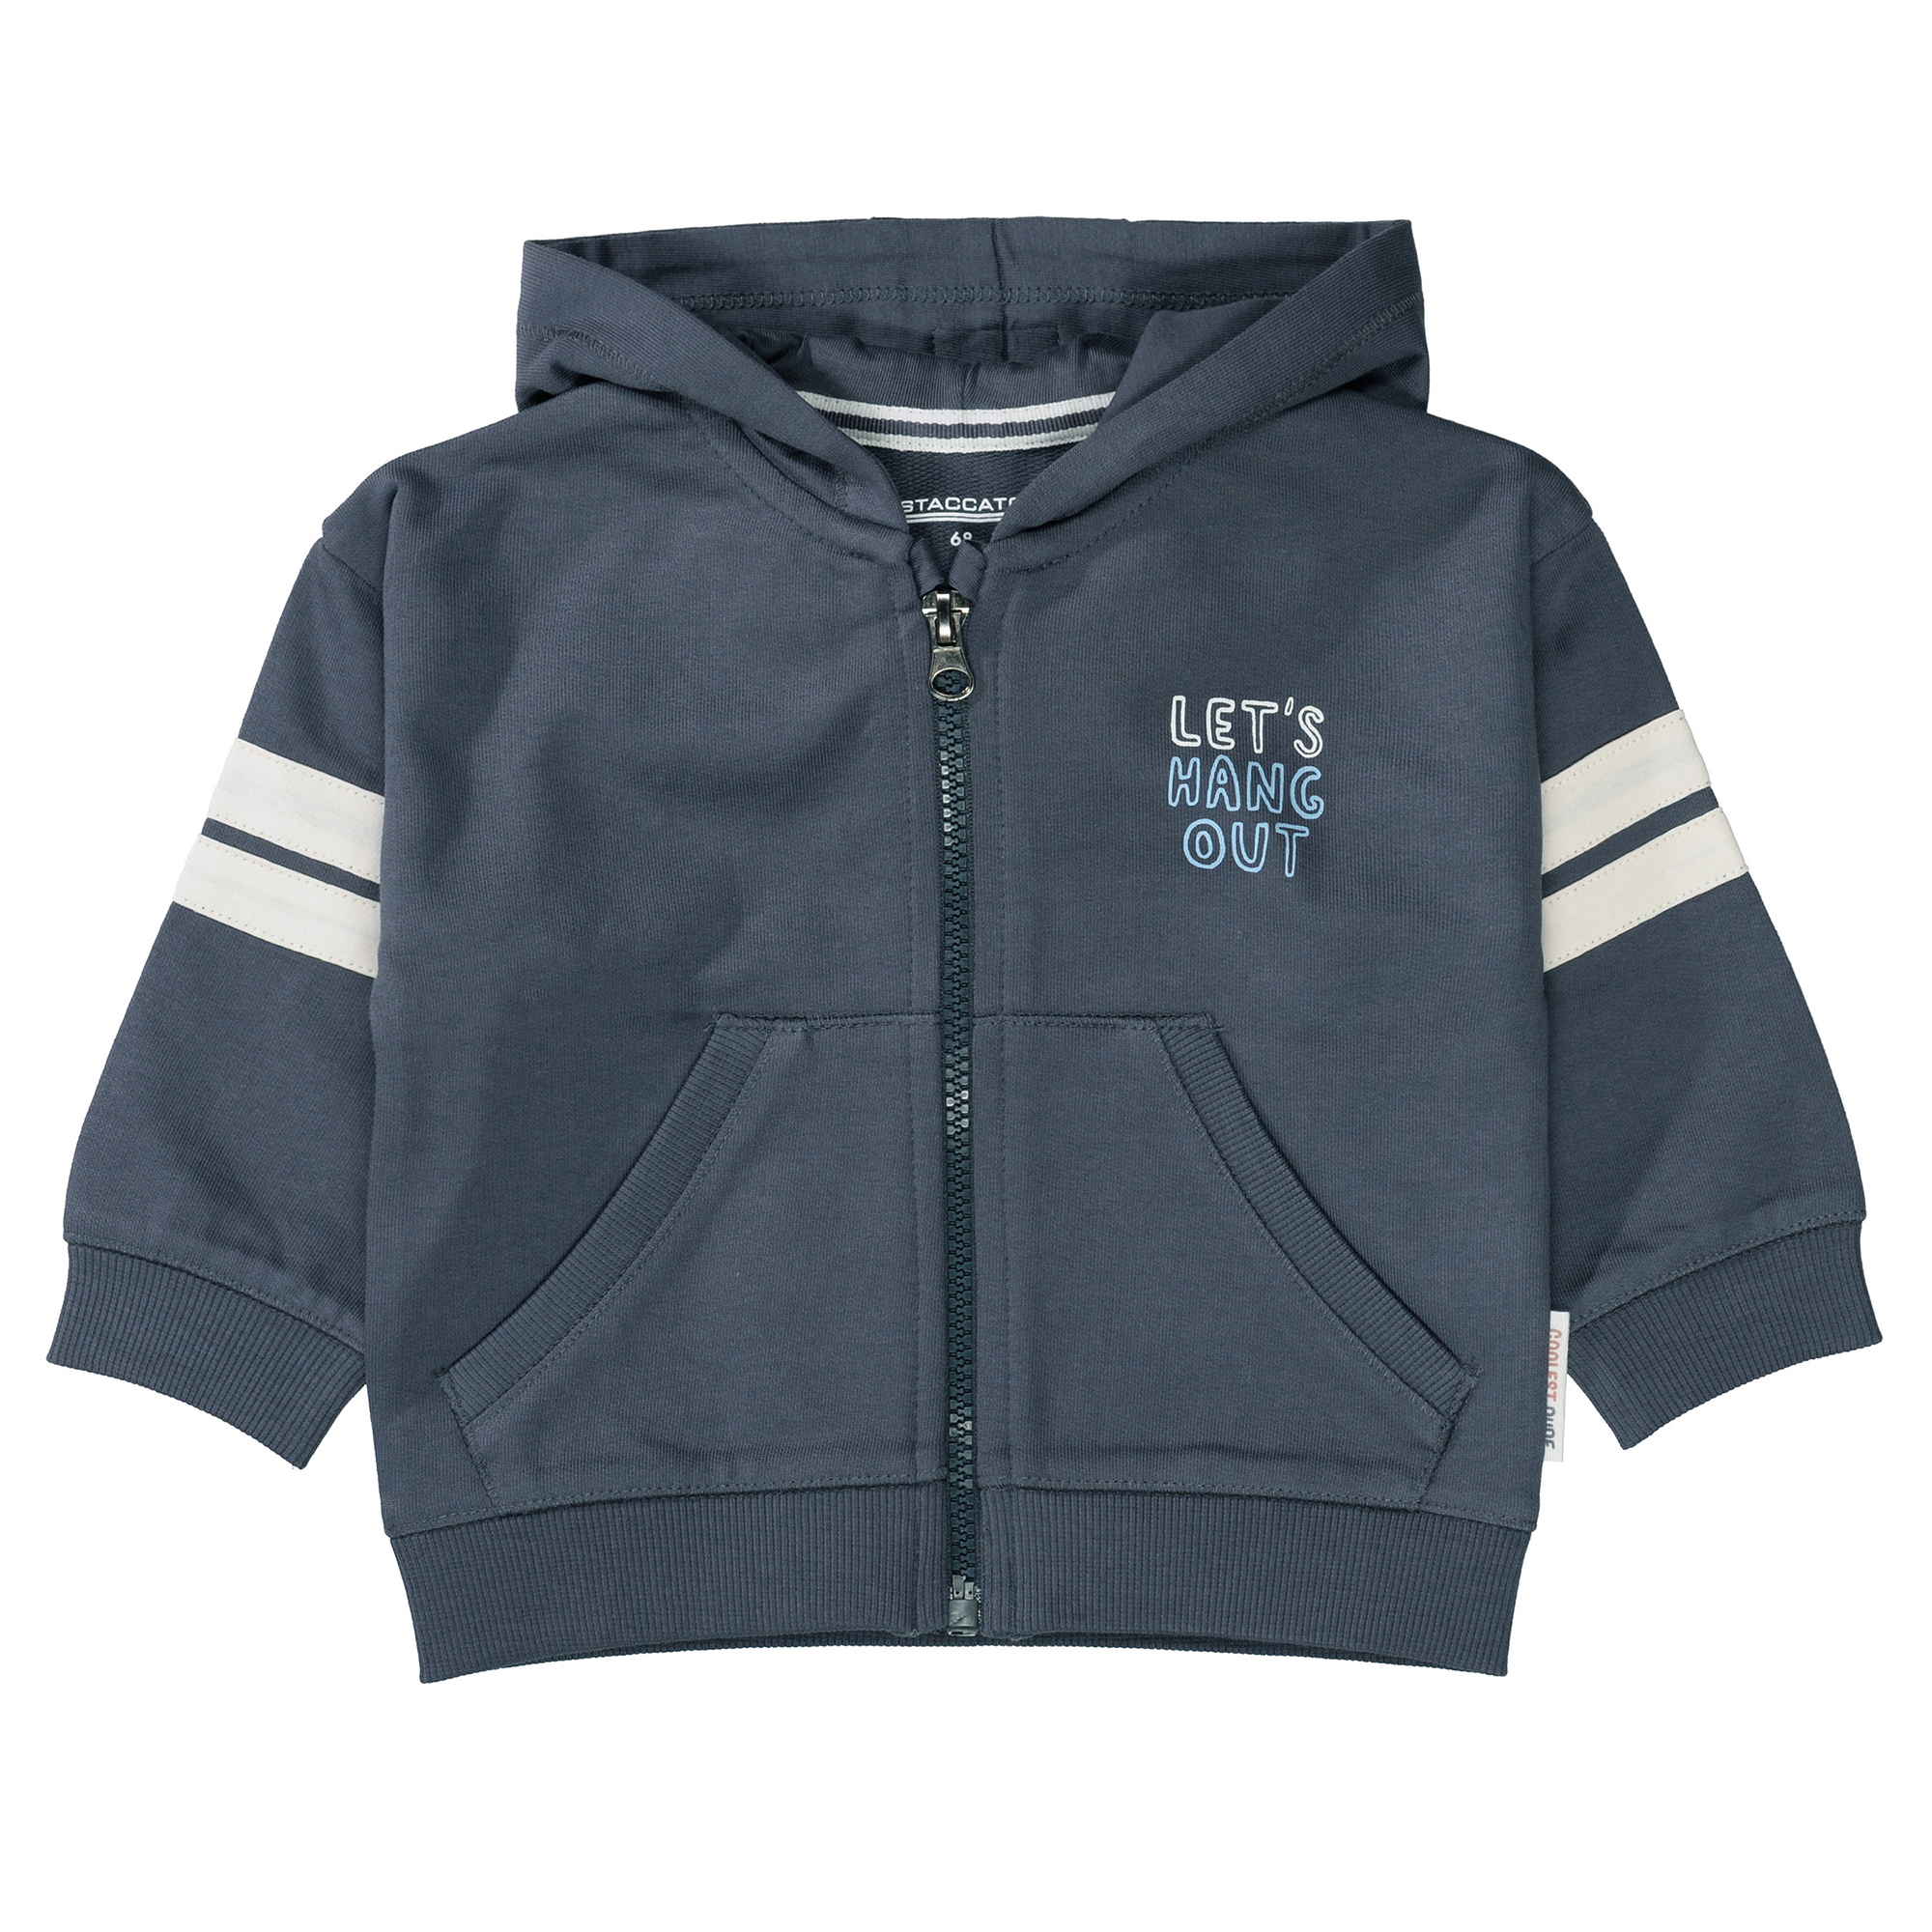 Sweatjacke Let's Hang Out STACCATO Blau M2000585455002 1